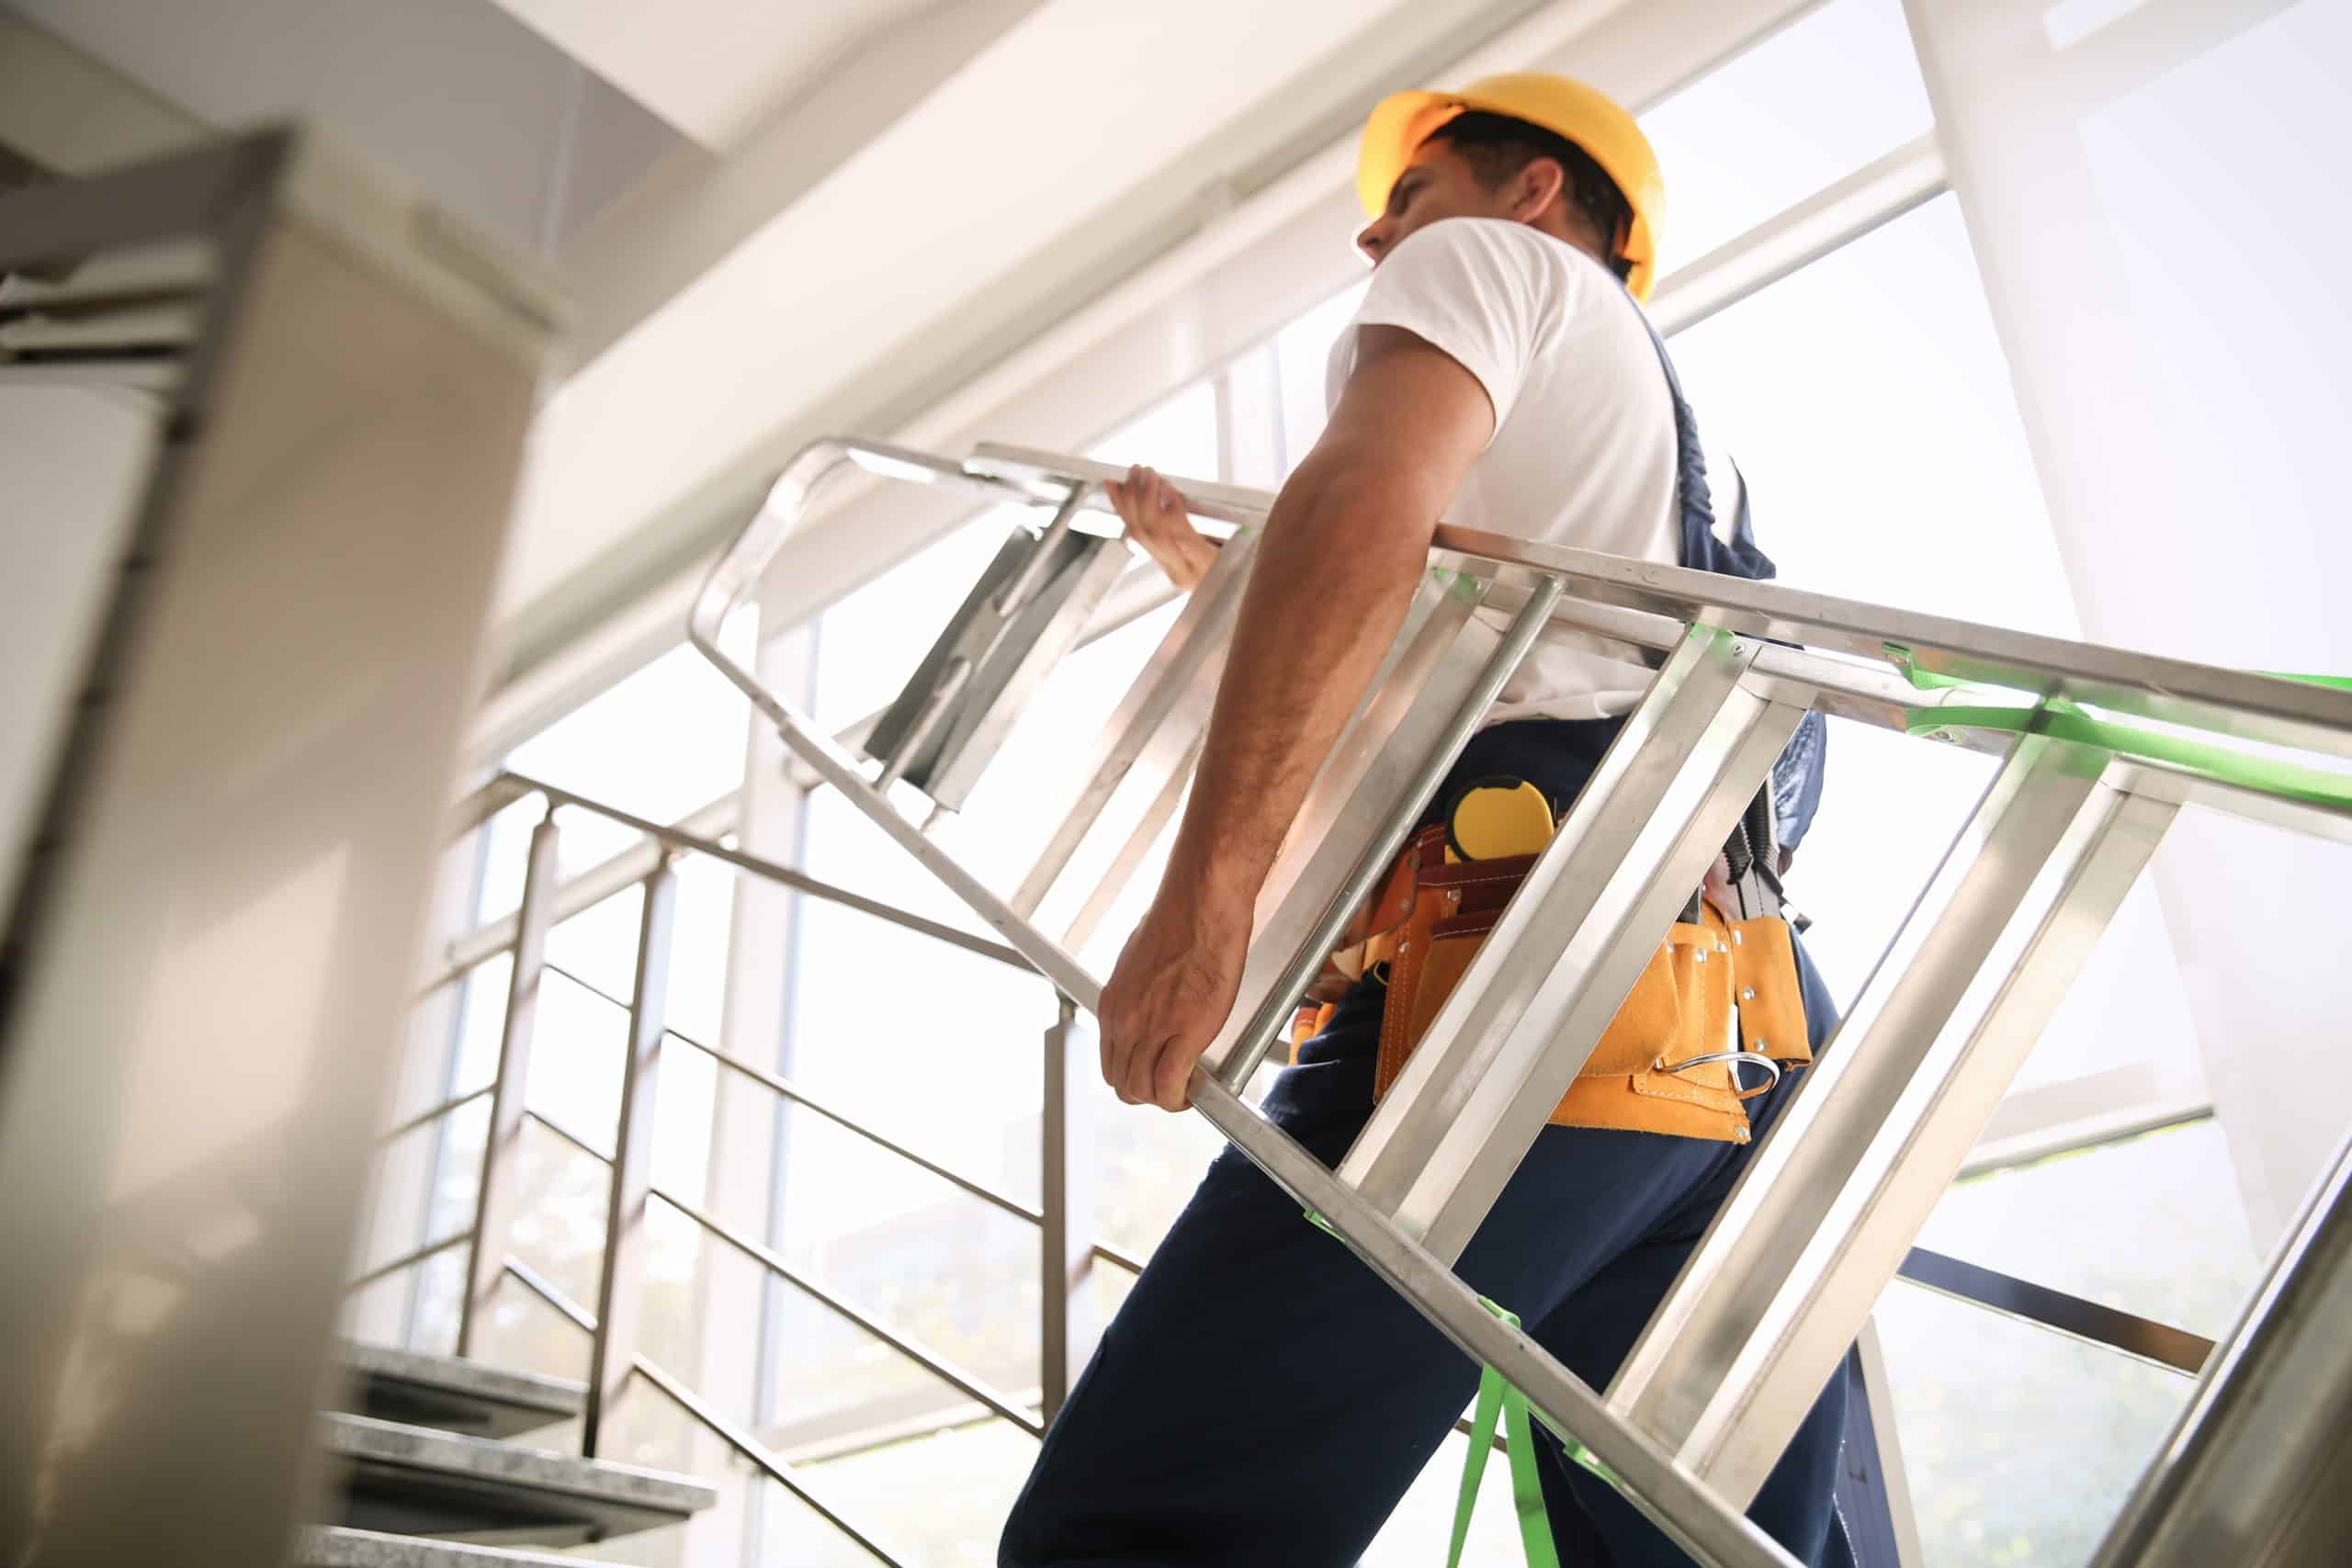 Professional builder carrying metal ladder up stairs, low angle